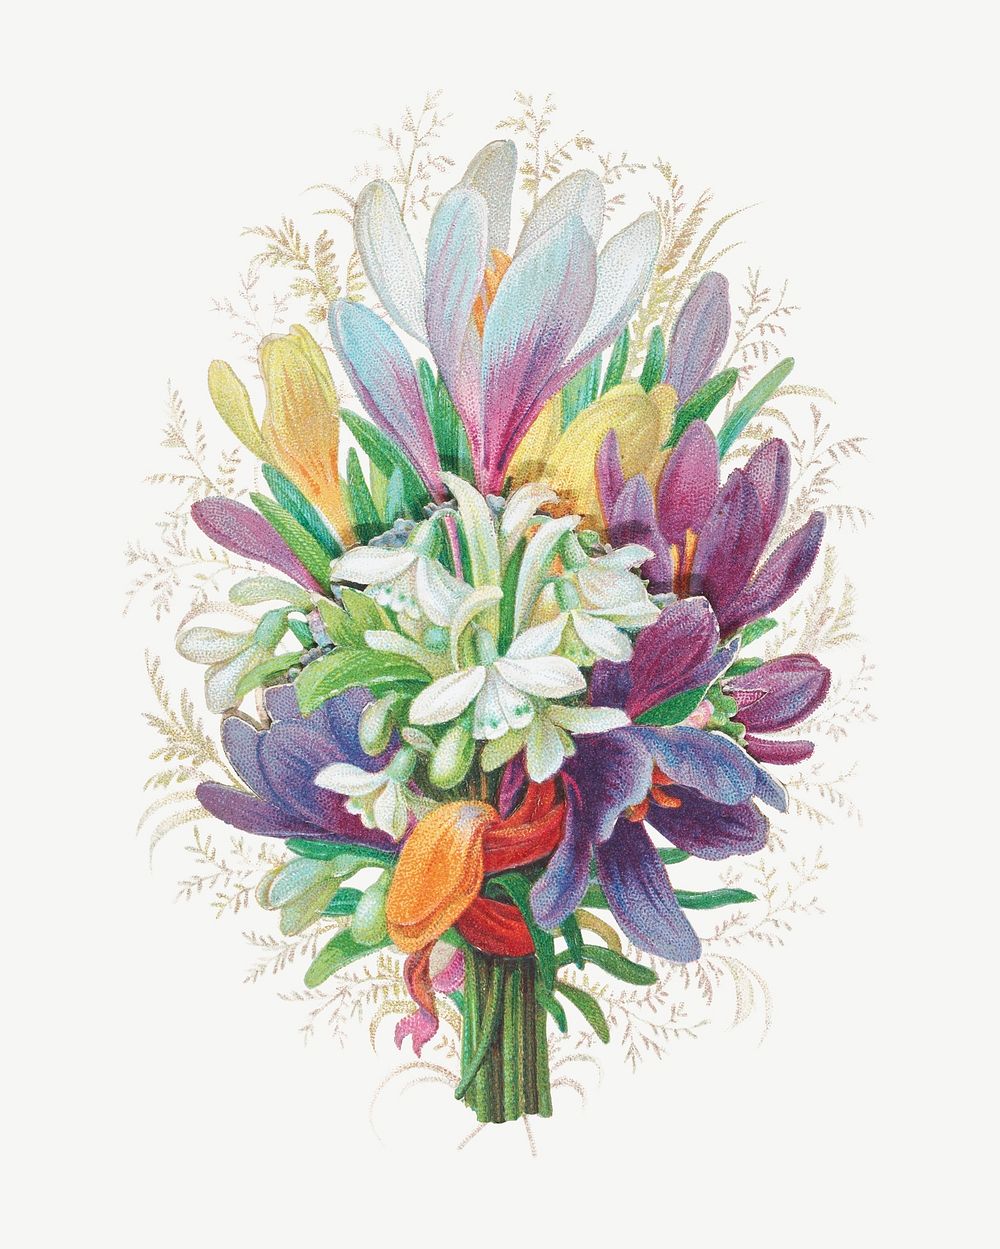 Colorful flower bouquet, vintage botanical illustration psd. Remixed by rawpixel.